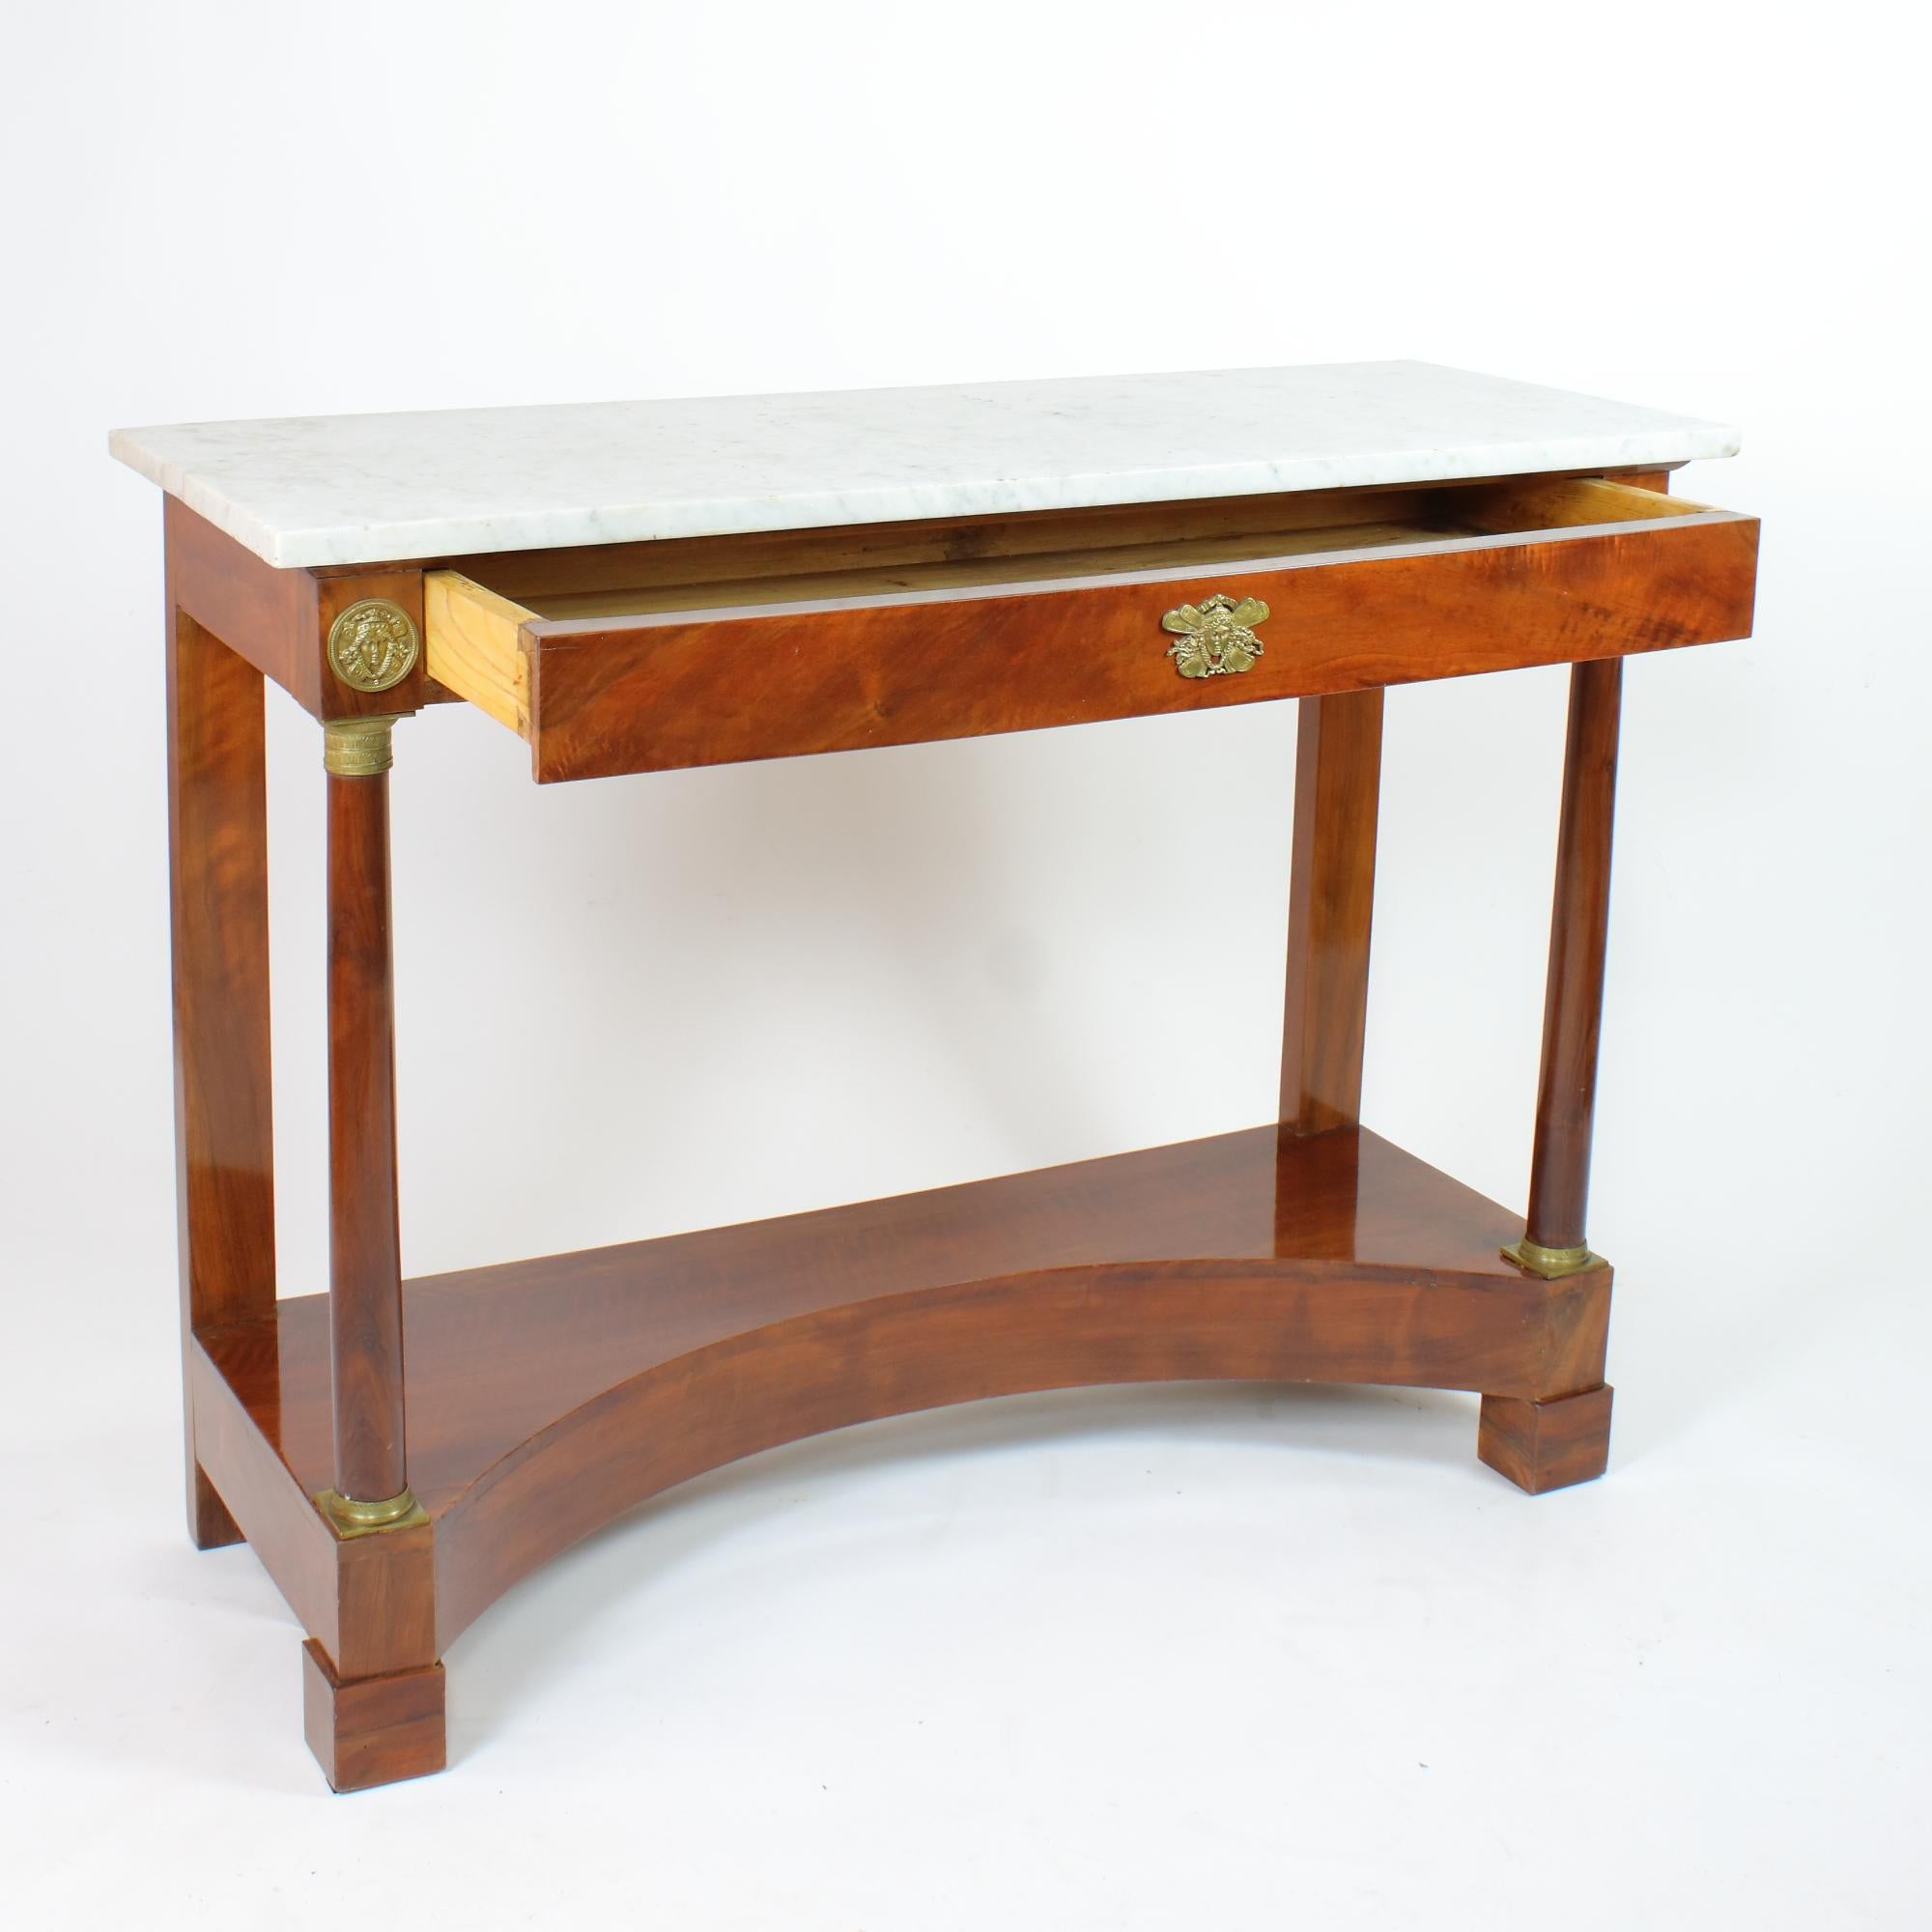 Early 19th Century French Empire Large Neoclassical Walnut Console Table For Sale 4